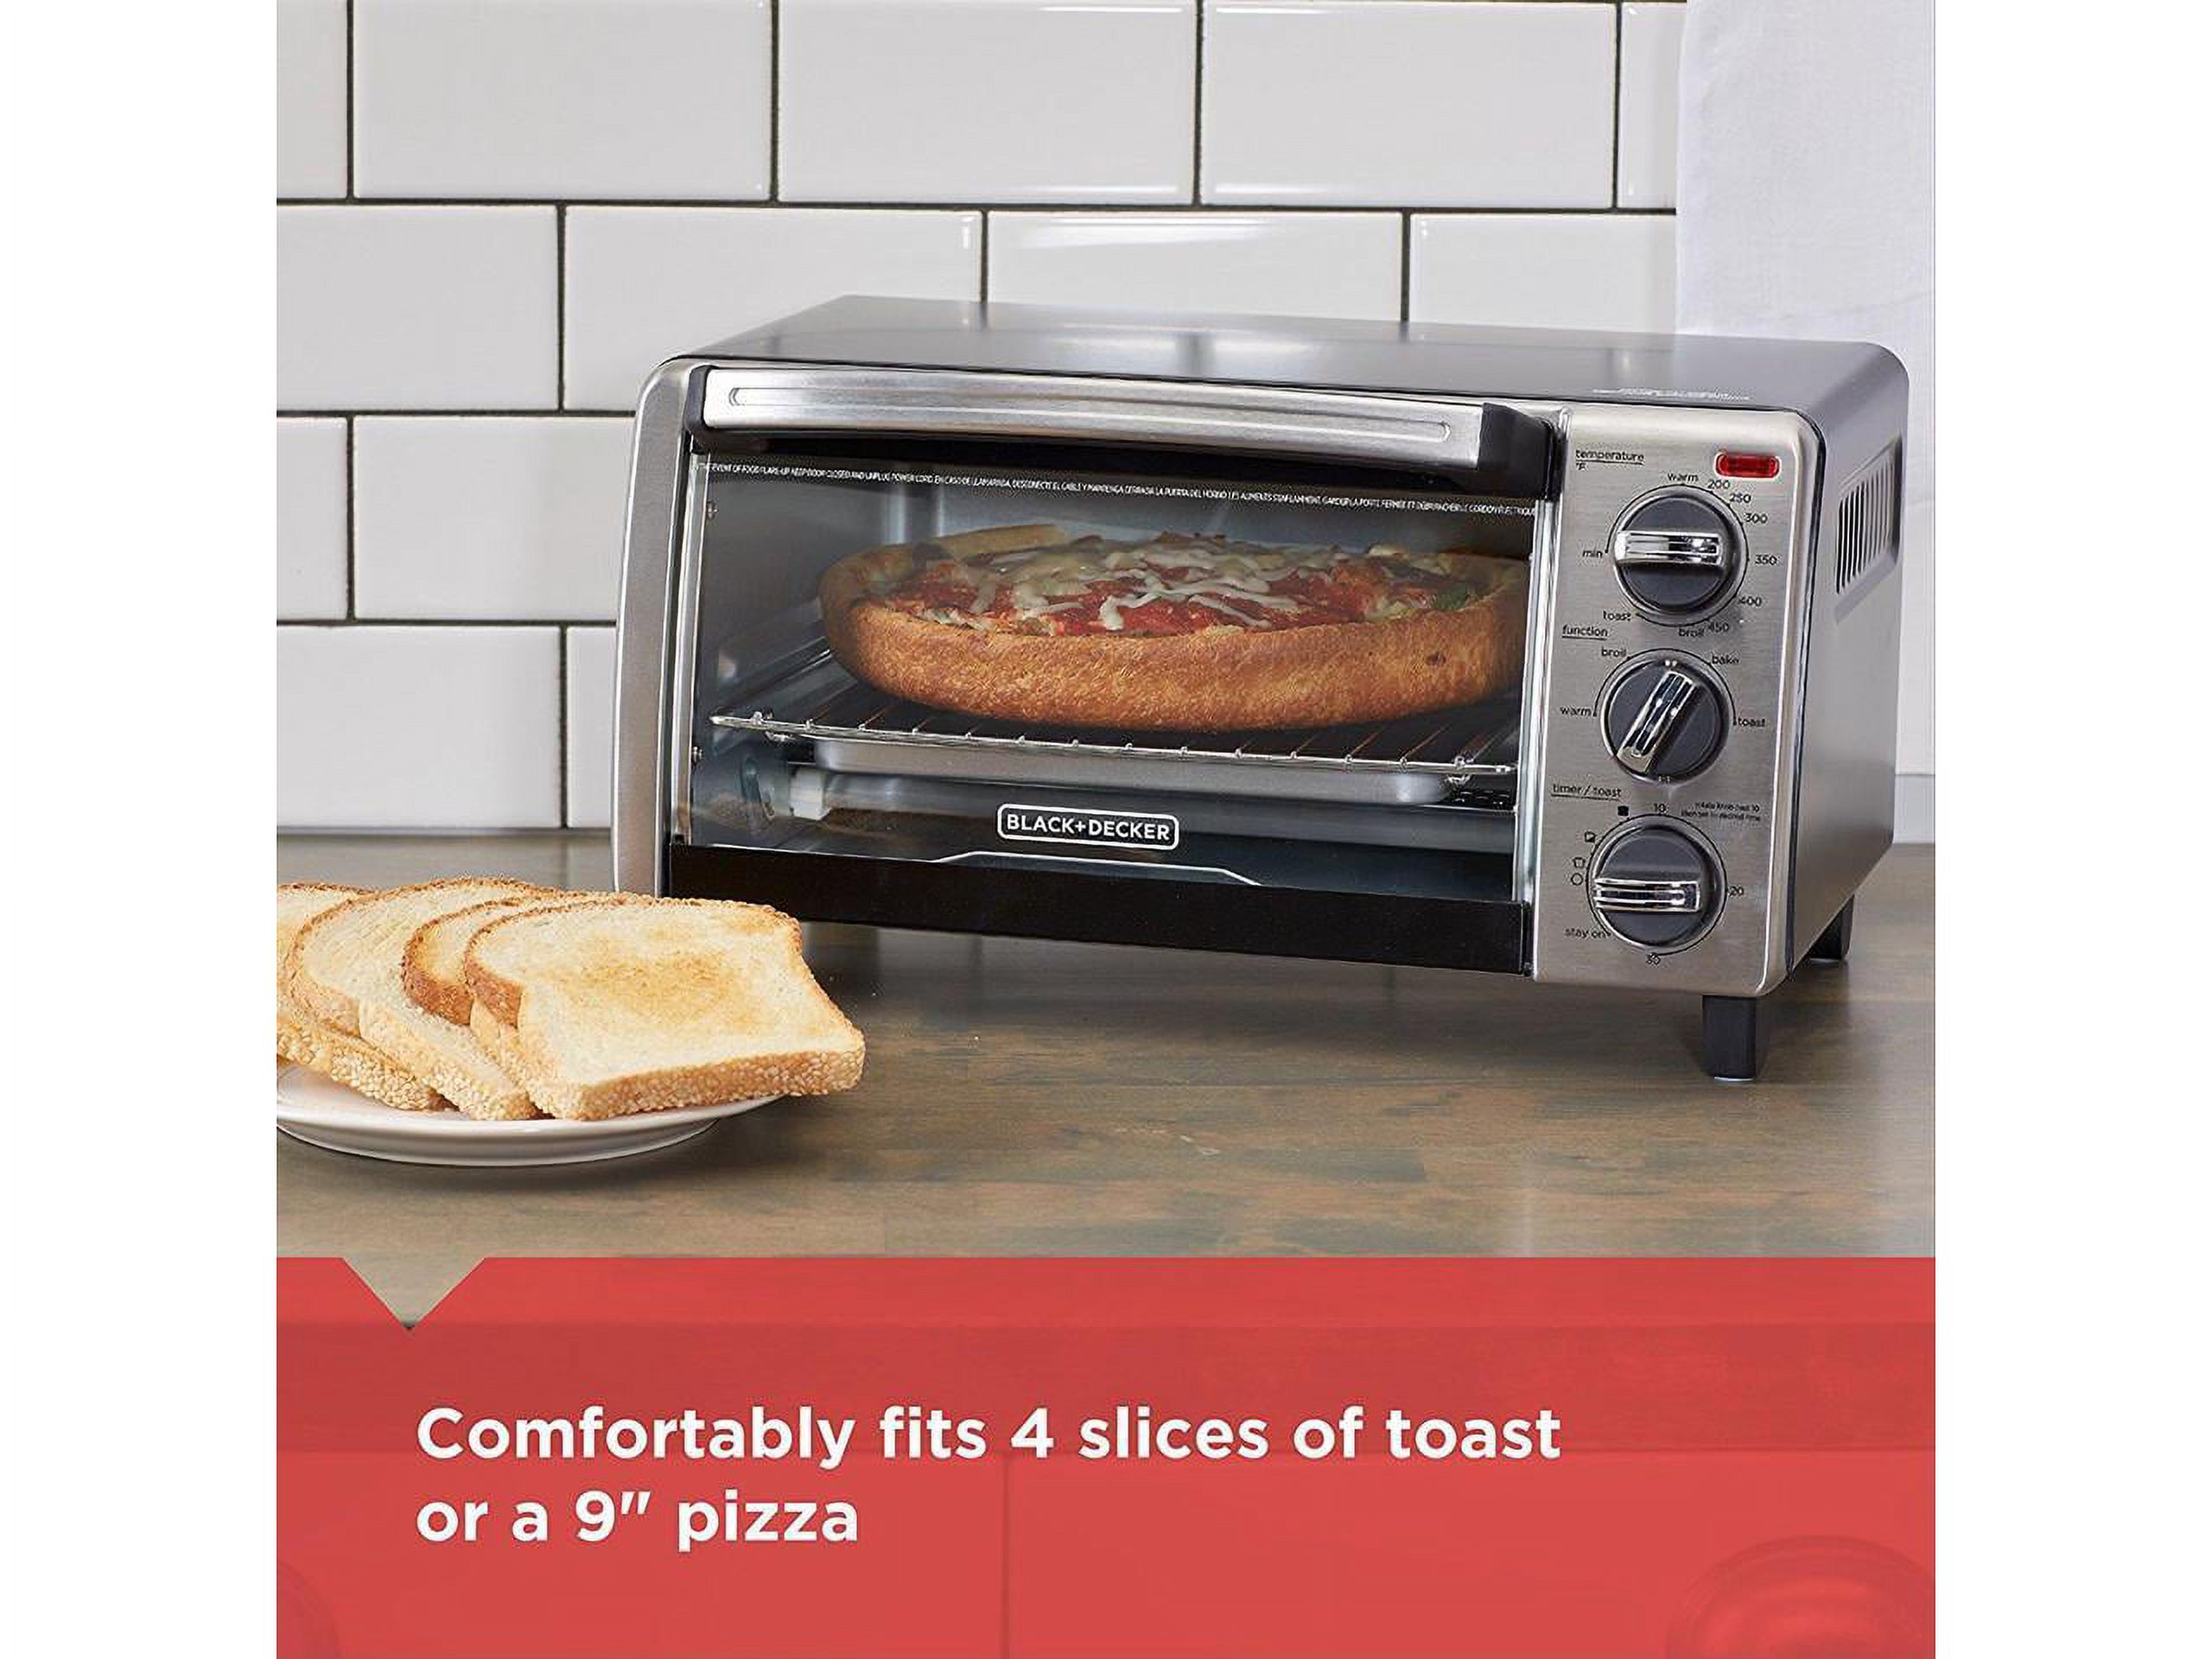 BLACK+DECKER 4-Slice Toaster Oven with Natural Convection, Black, TO1750SB - image 5 of 12